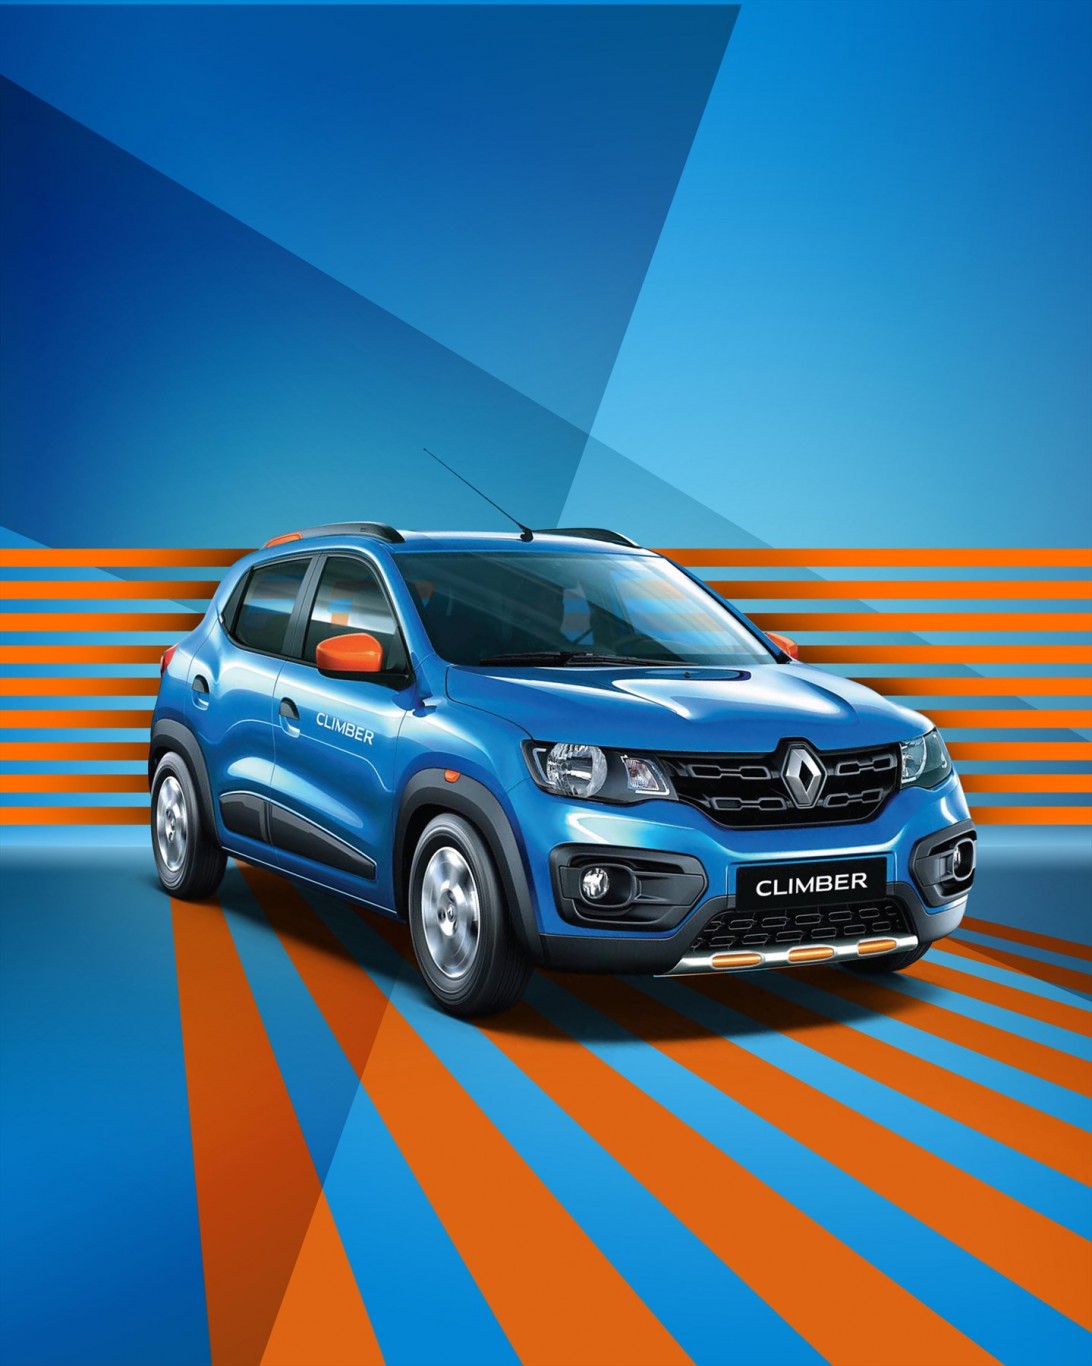 New Renault KWID CLIMBER Limited Edition takes the entry-level vehicle segment to new heights